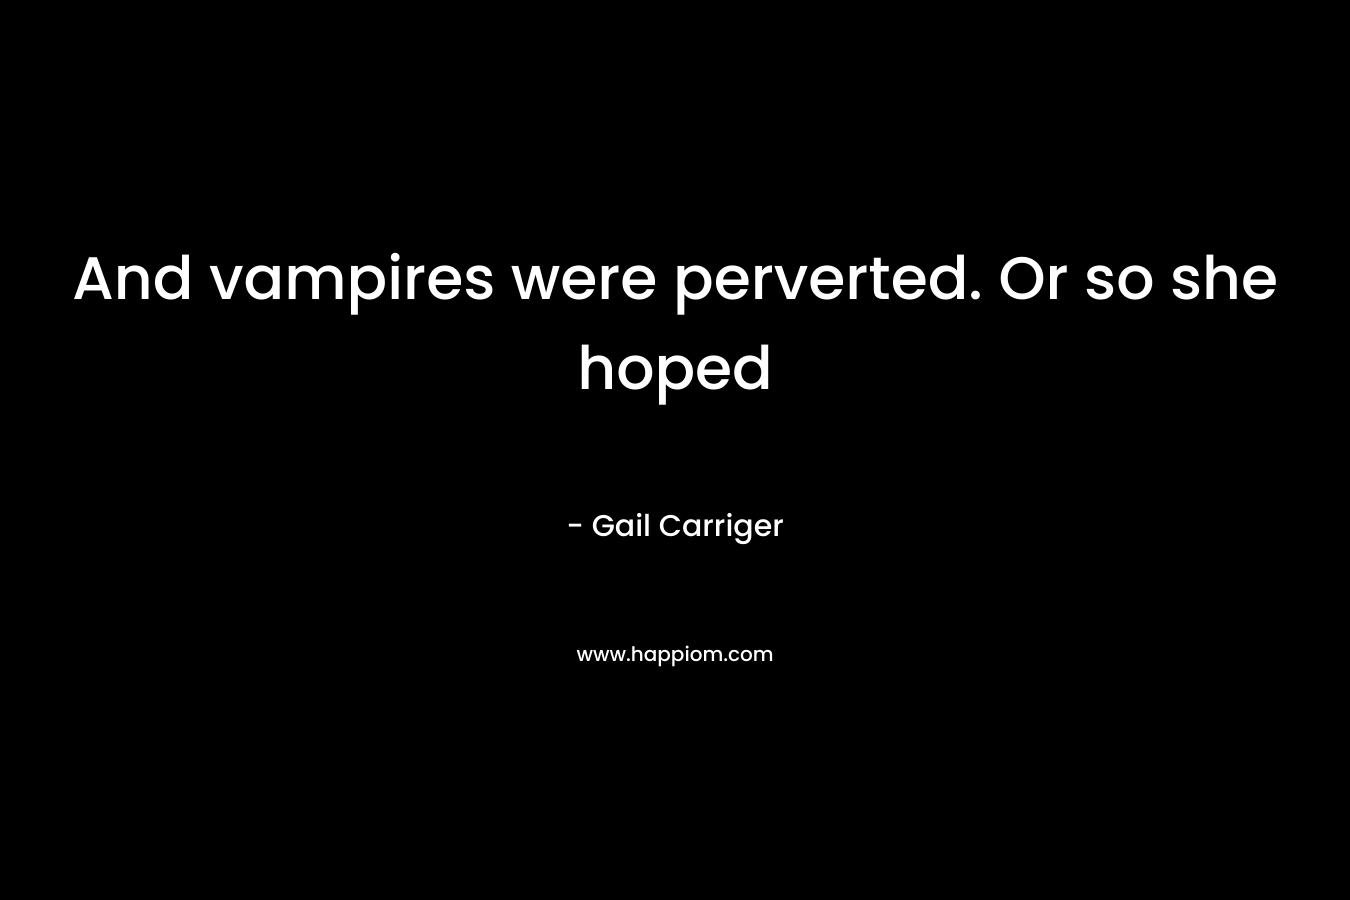 And vampires were perverted. Or so she hoped